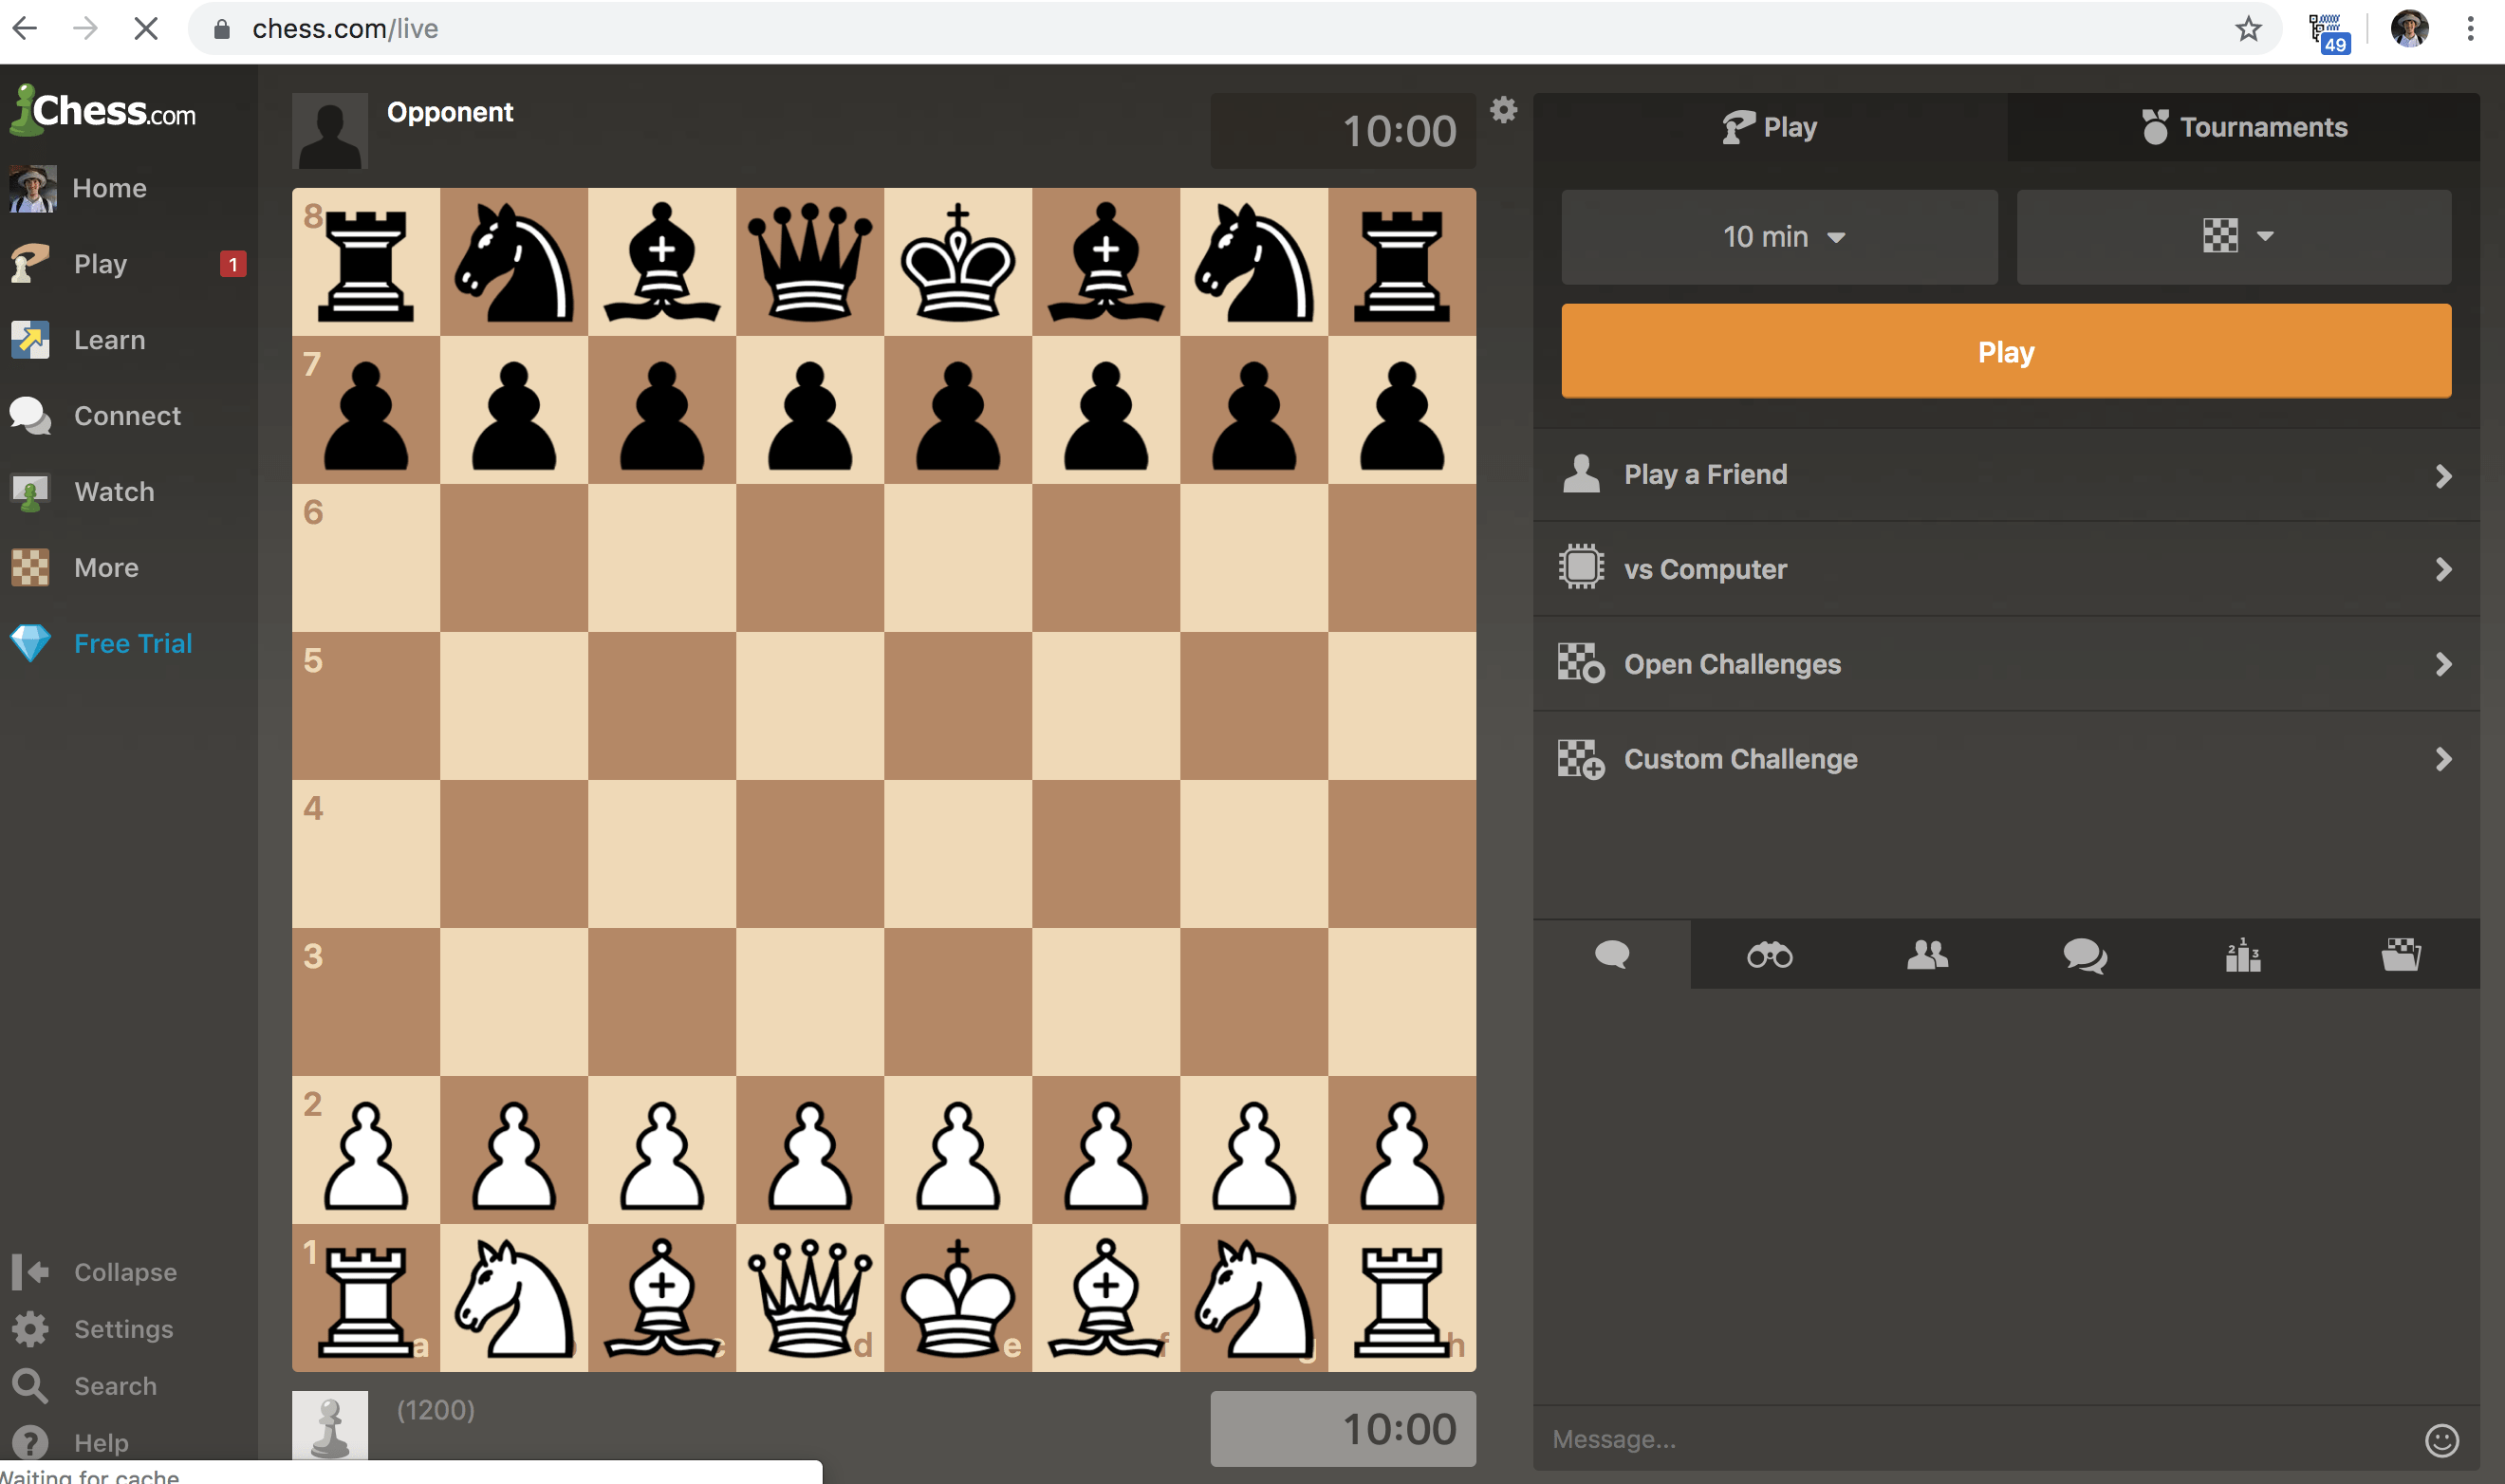 How to Play With Friends in Chess.com App 